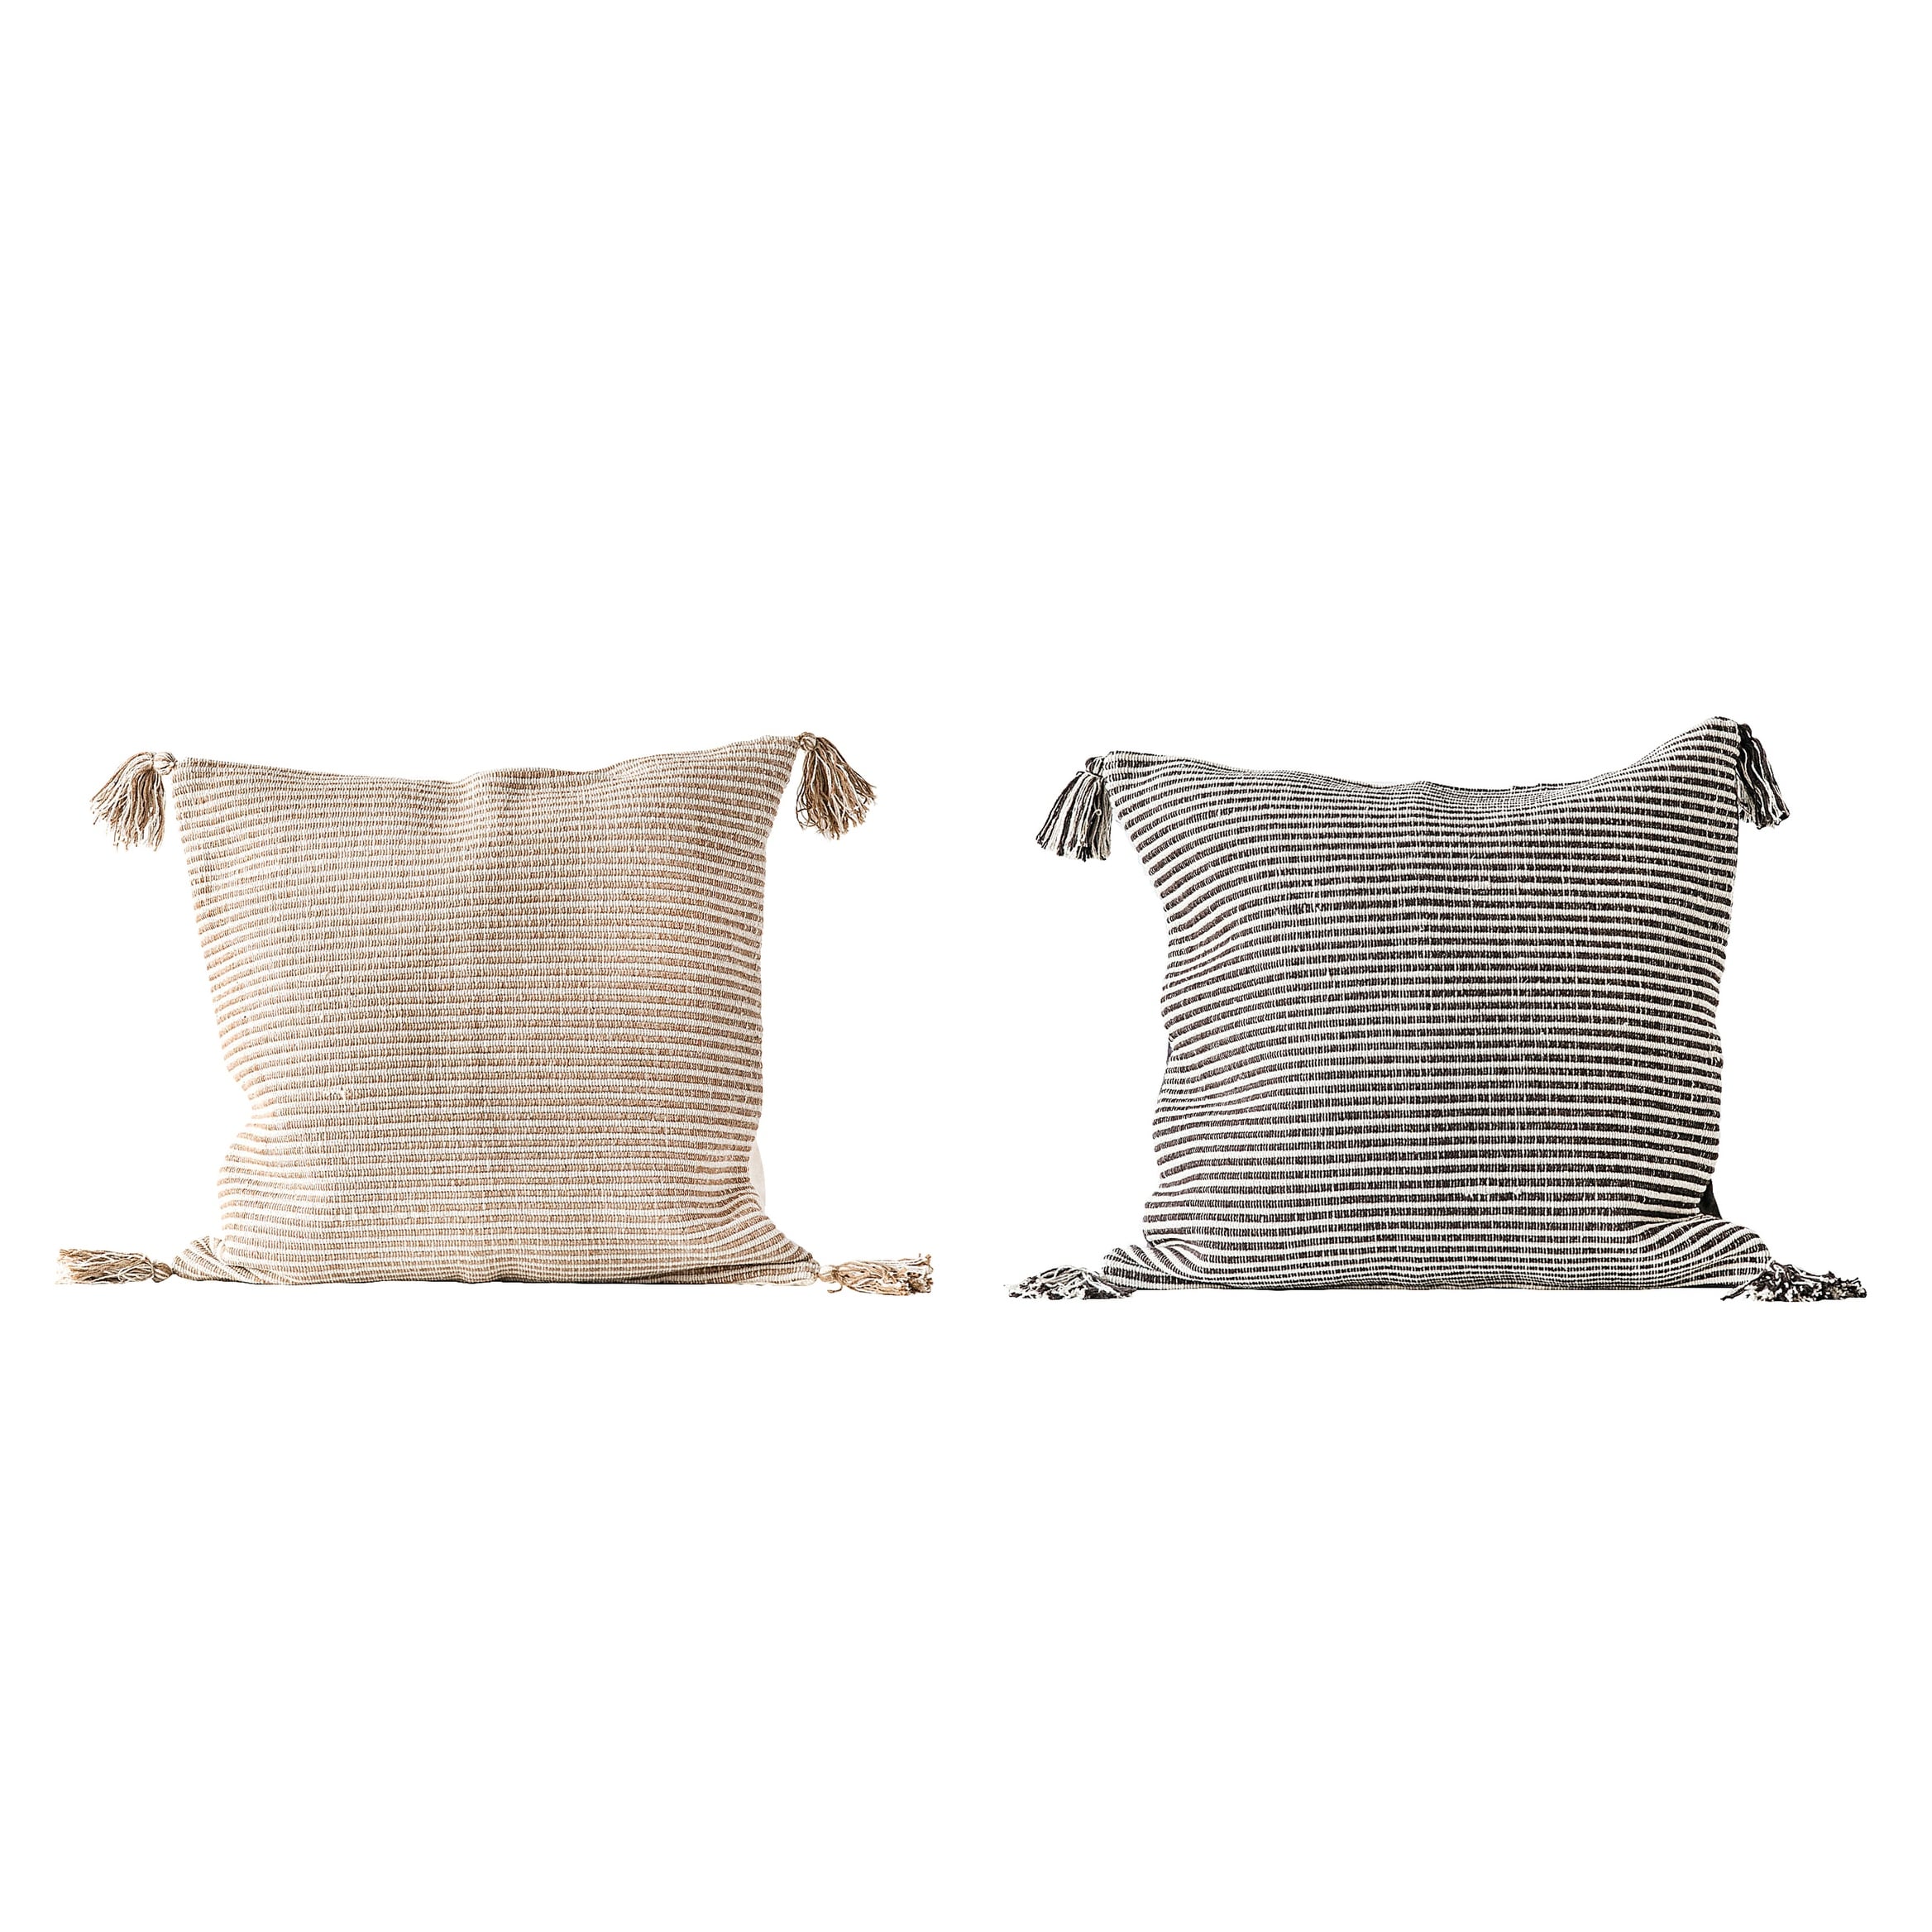 Striped Square Cotton Woven Pillow with Tassels (Set of 2 Colors)